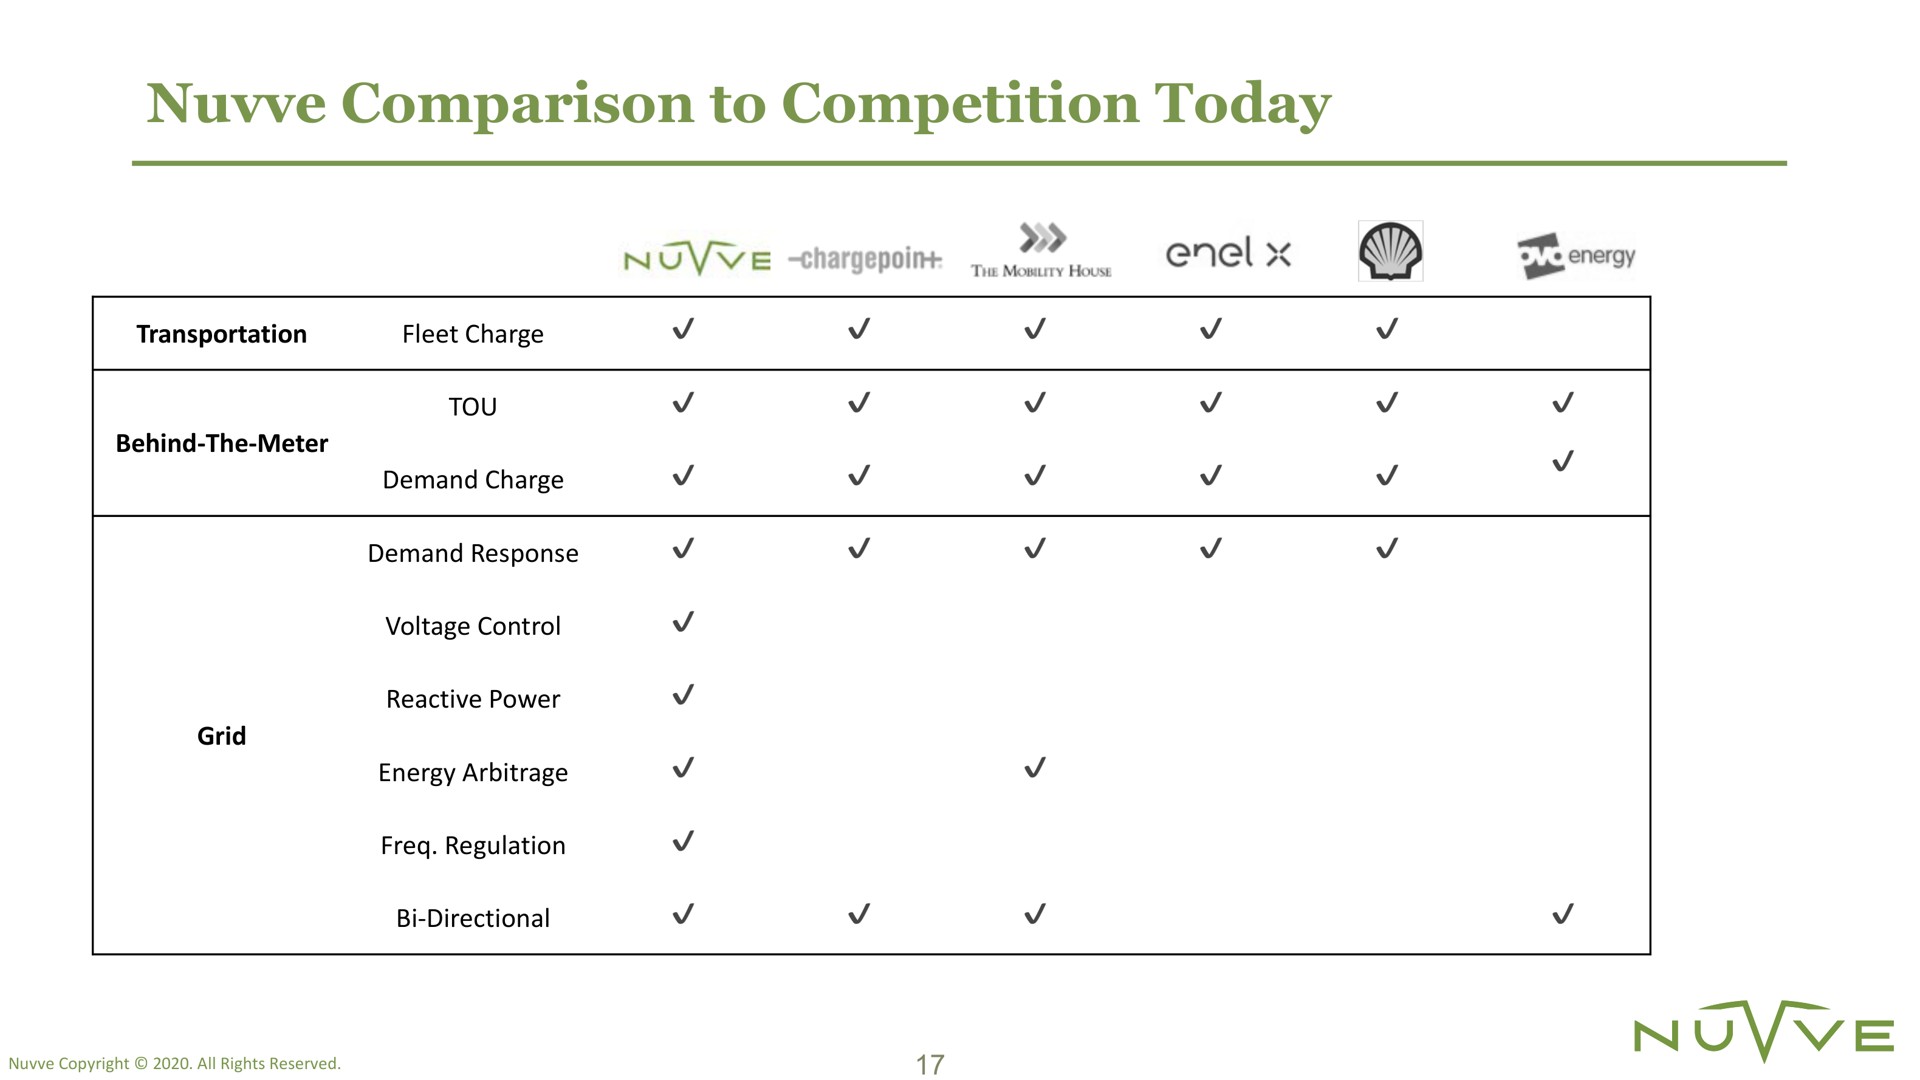 comparison to competition today | Nuvve